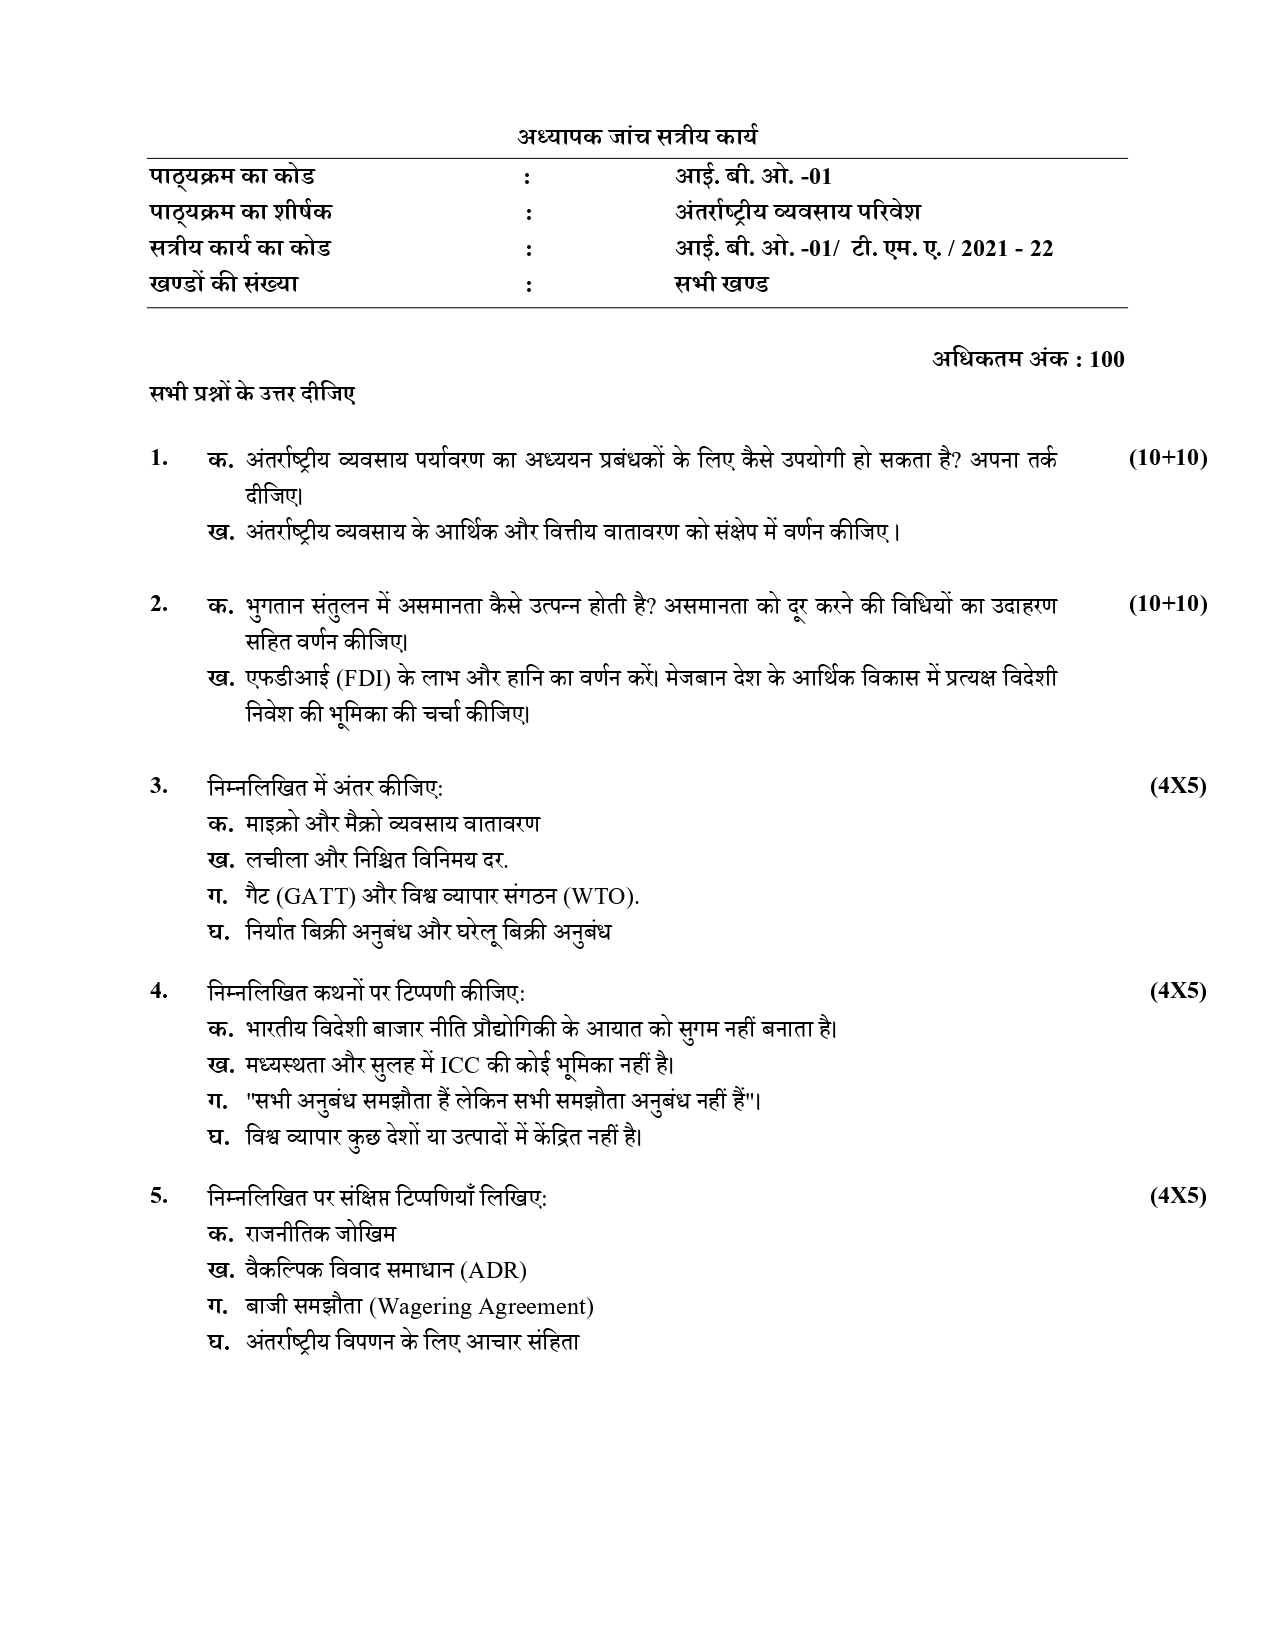 IGNOU IBO 01 HINDI SOLVED ASSIGNMENT 2021-22